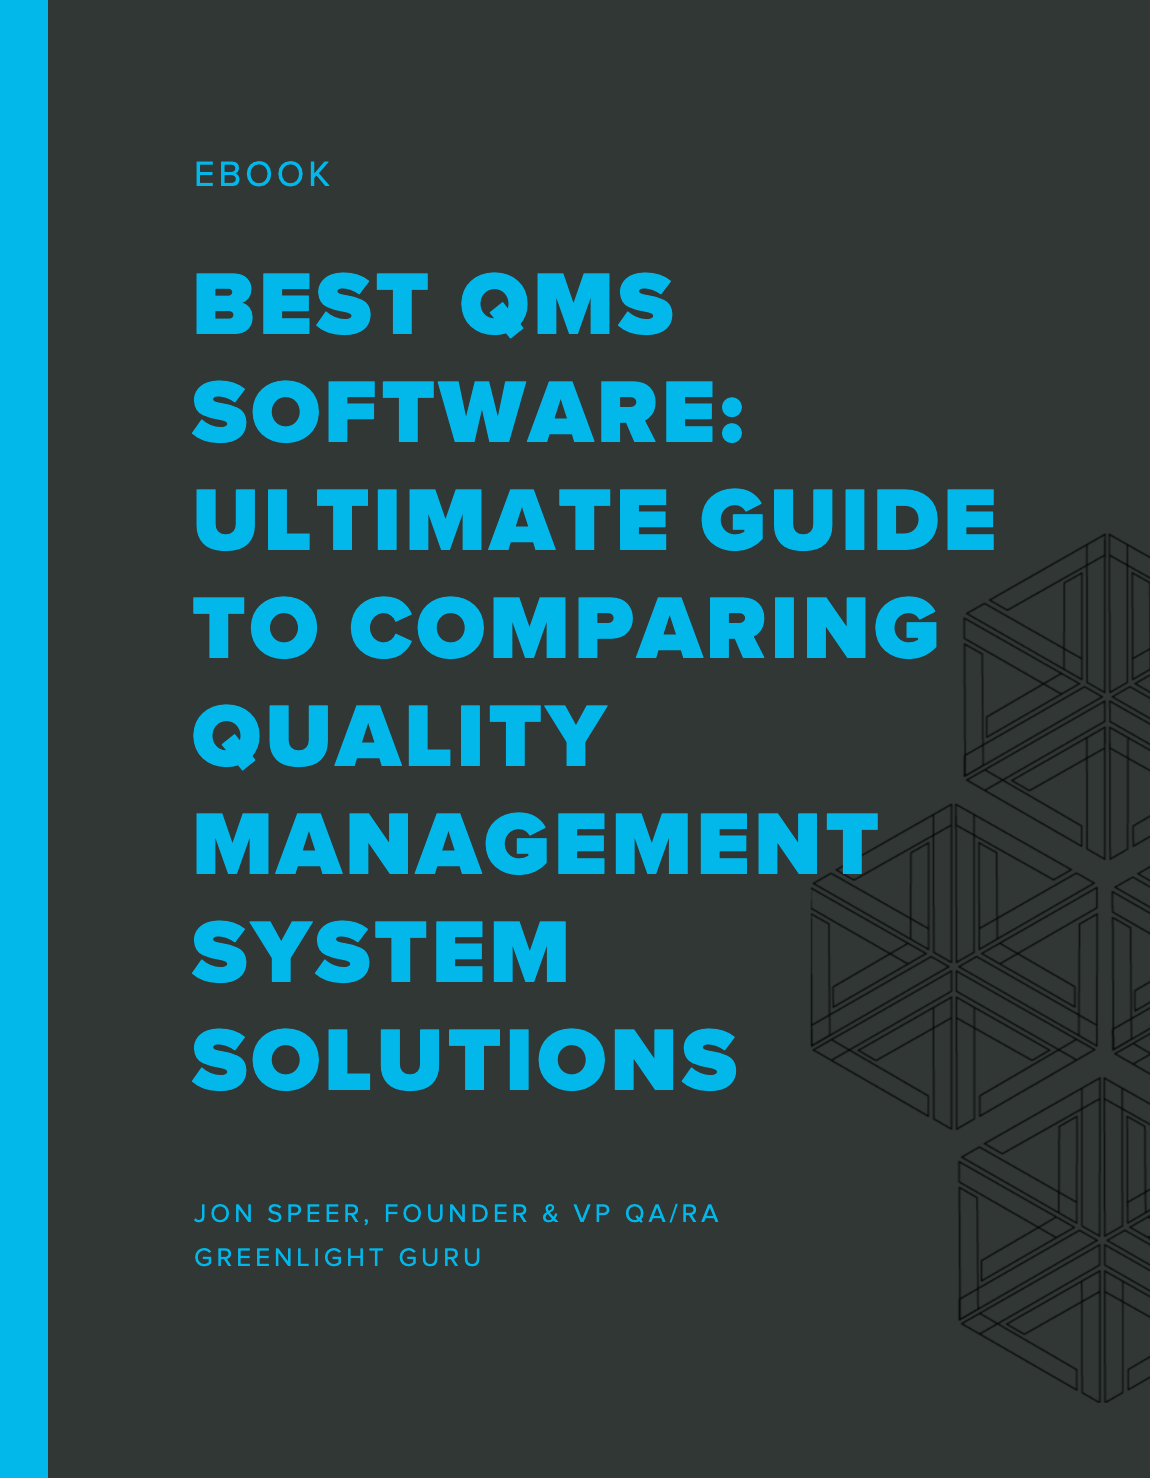 Best QMS Software: Ultimate Guide to Comparing Quality Management System Solutions